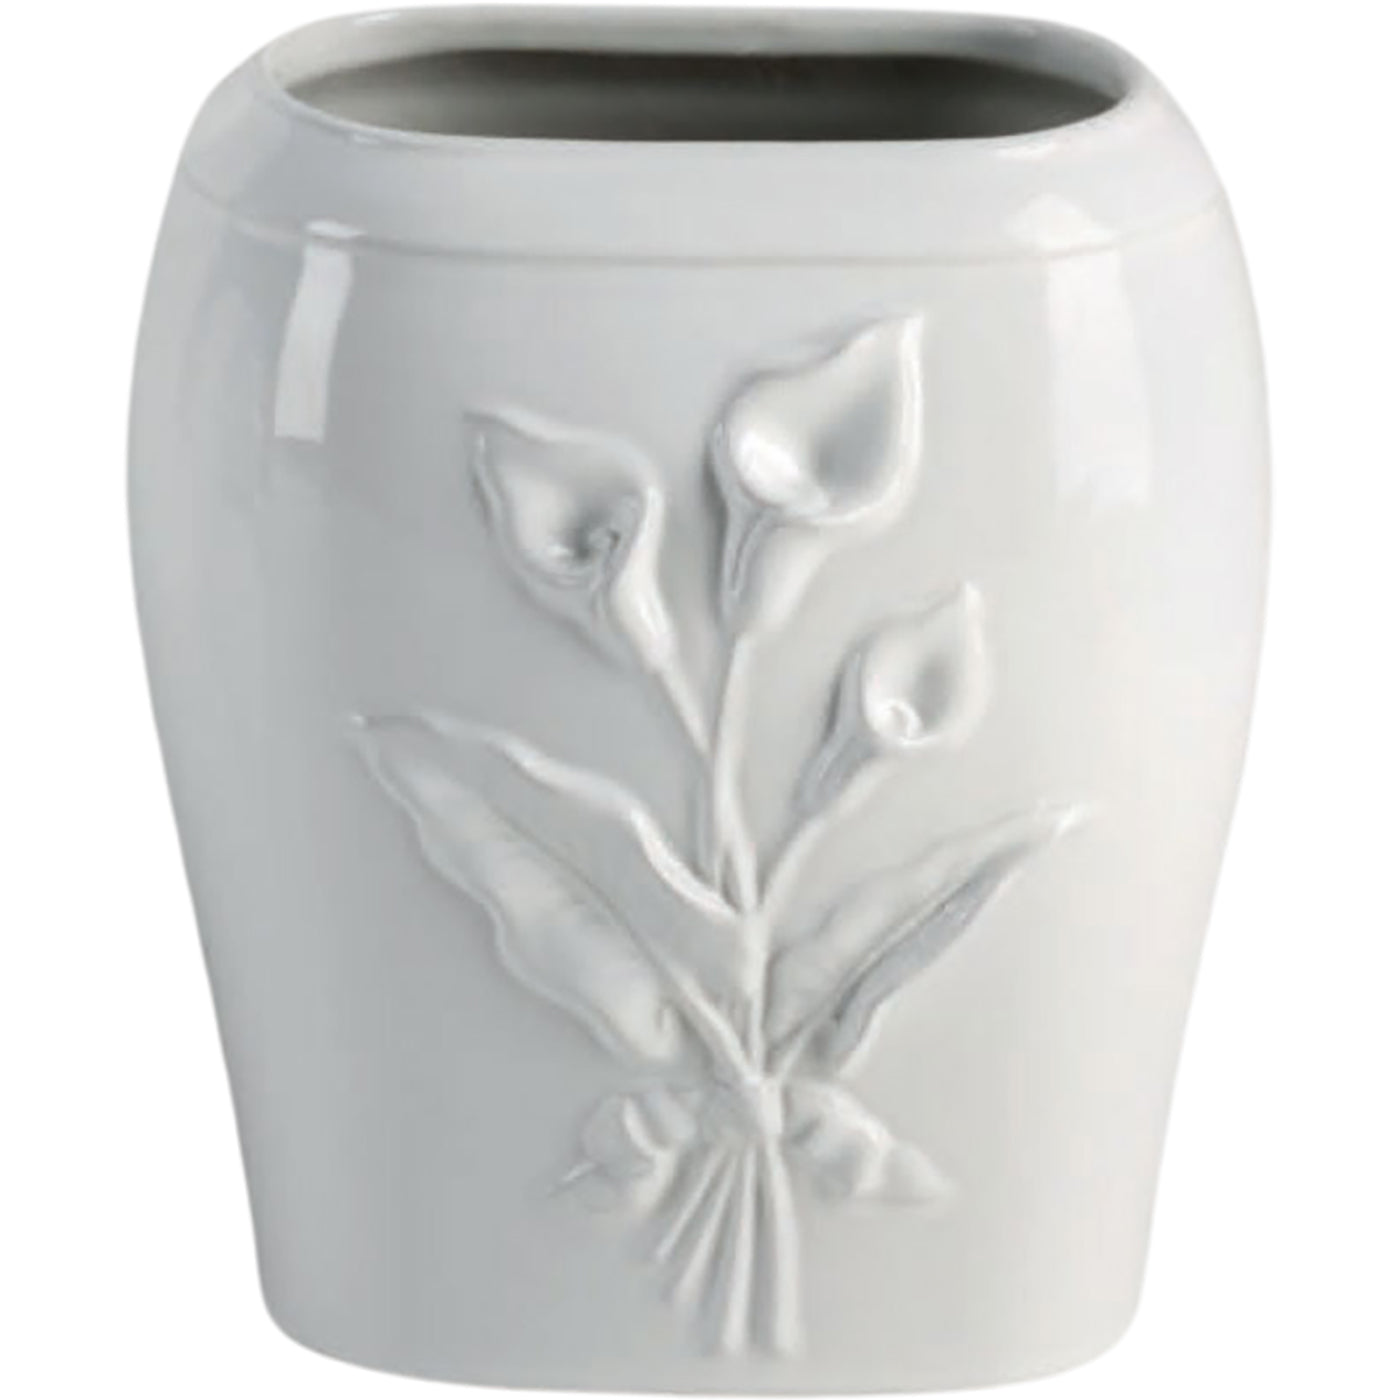 Rectangular grave vase Calla 19x17cm - 7.5x6.7in In white porcelain, ground attached CAL160T